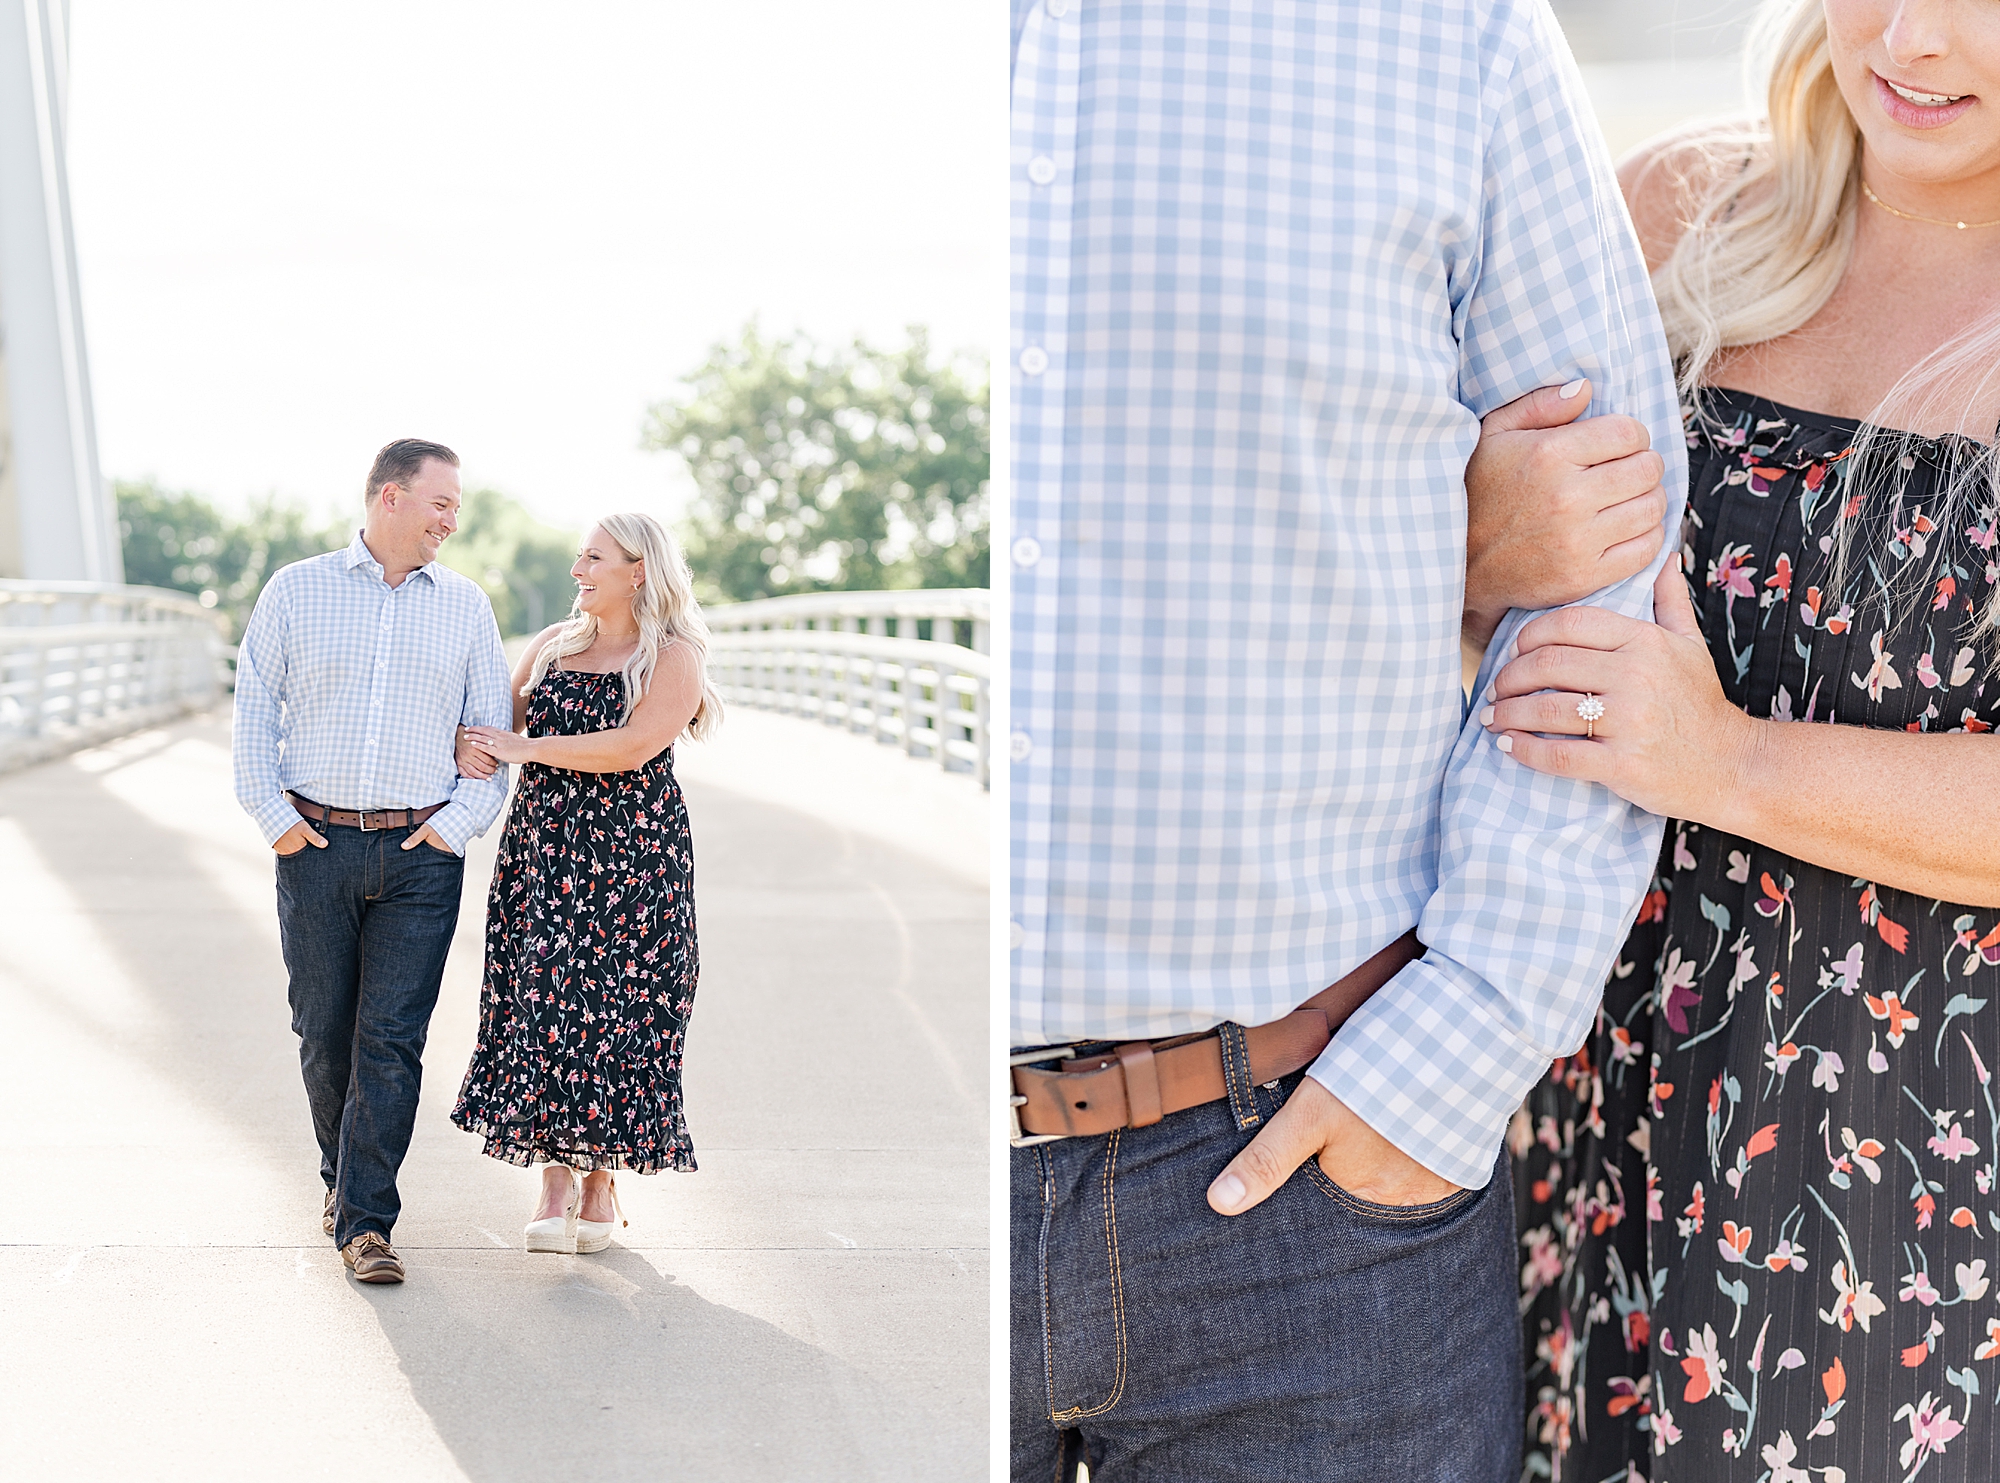 downtown Columbus engagement portraits of bride holding groom's arm